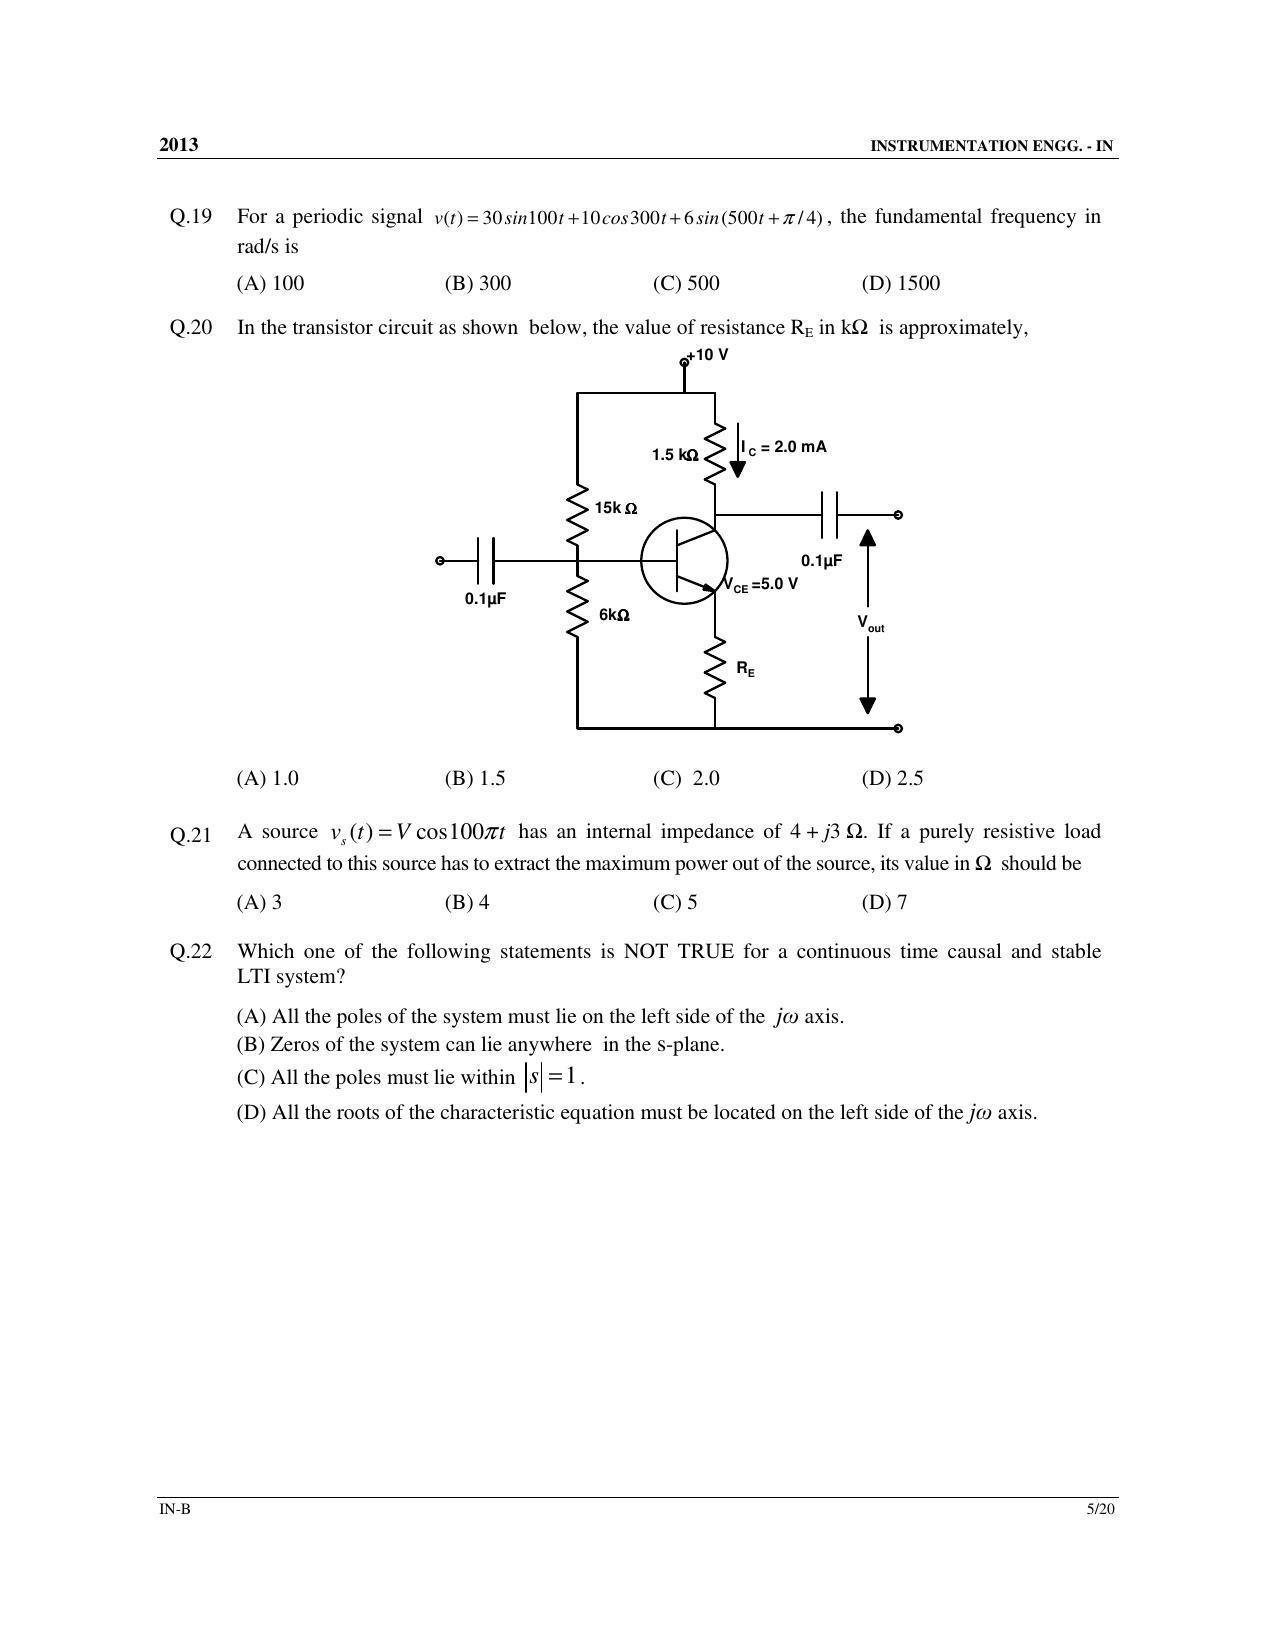 GATE 2013 Instrumentation Engineering (IN) Question Paper with Answer Key - Page 23